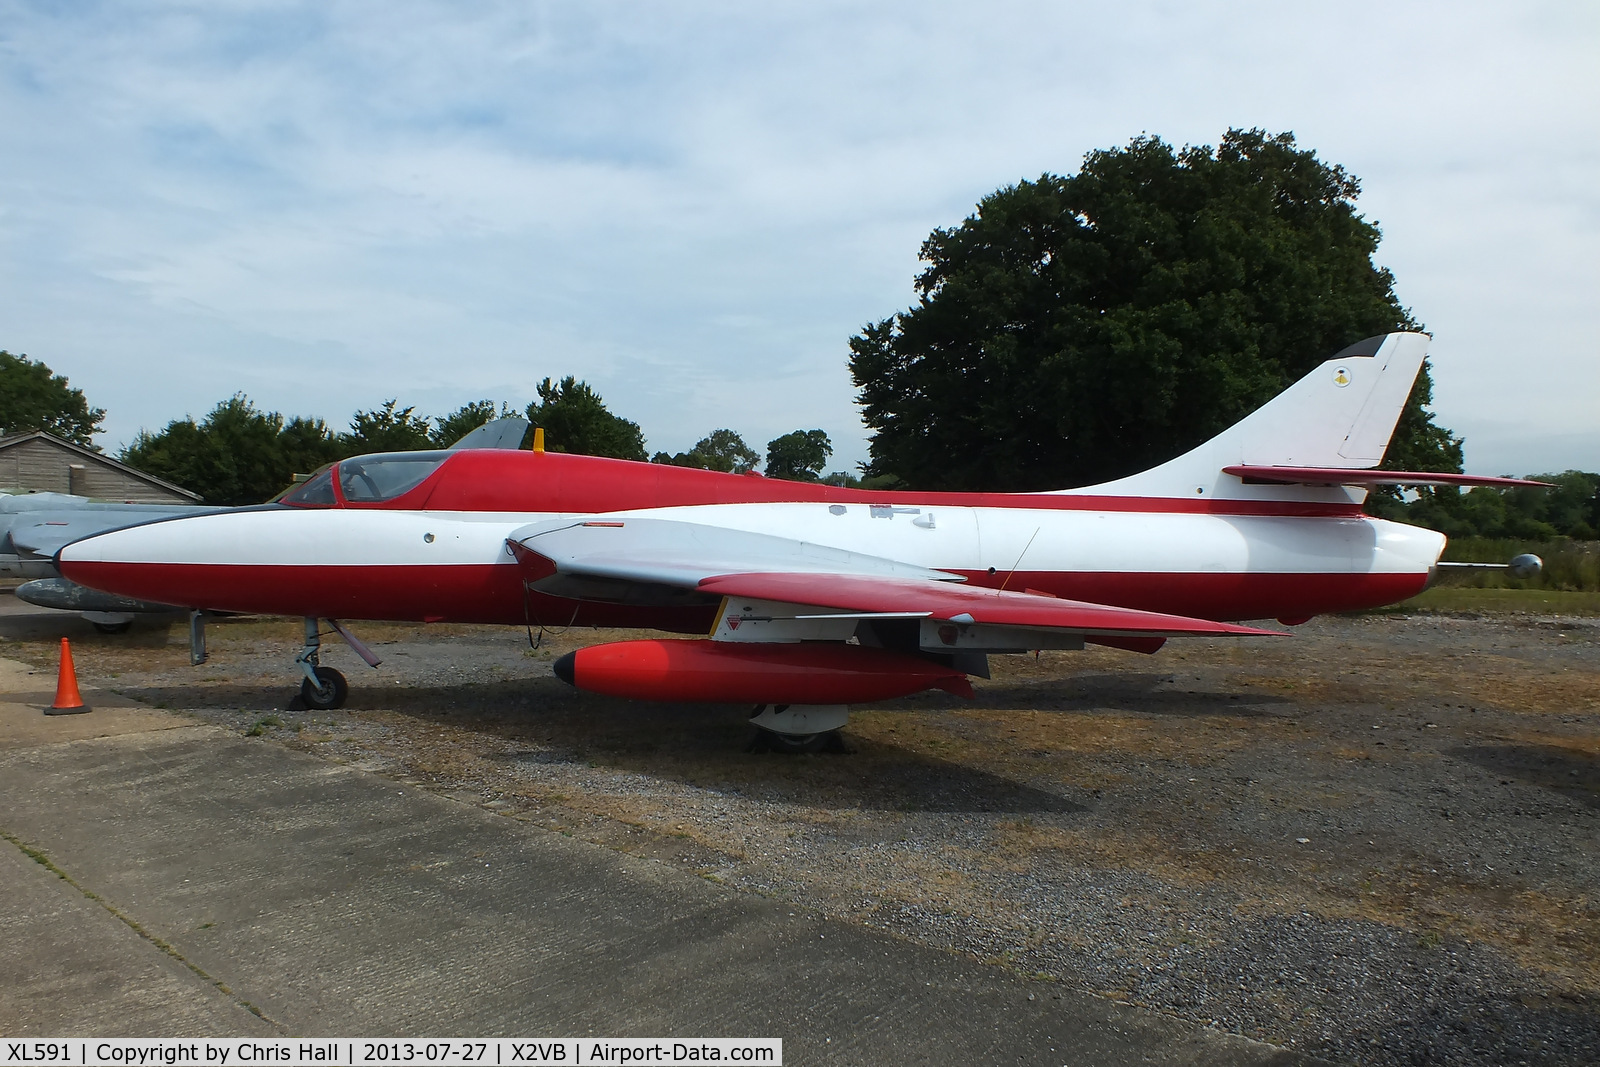 XL591, 1958 Hawker Hunter T.7 C/N 41H-693685, displayed at the Gatwick Aviation Museum